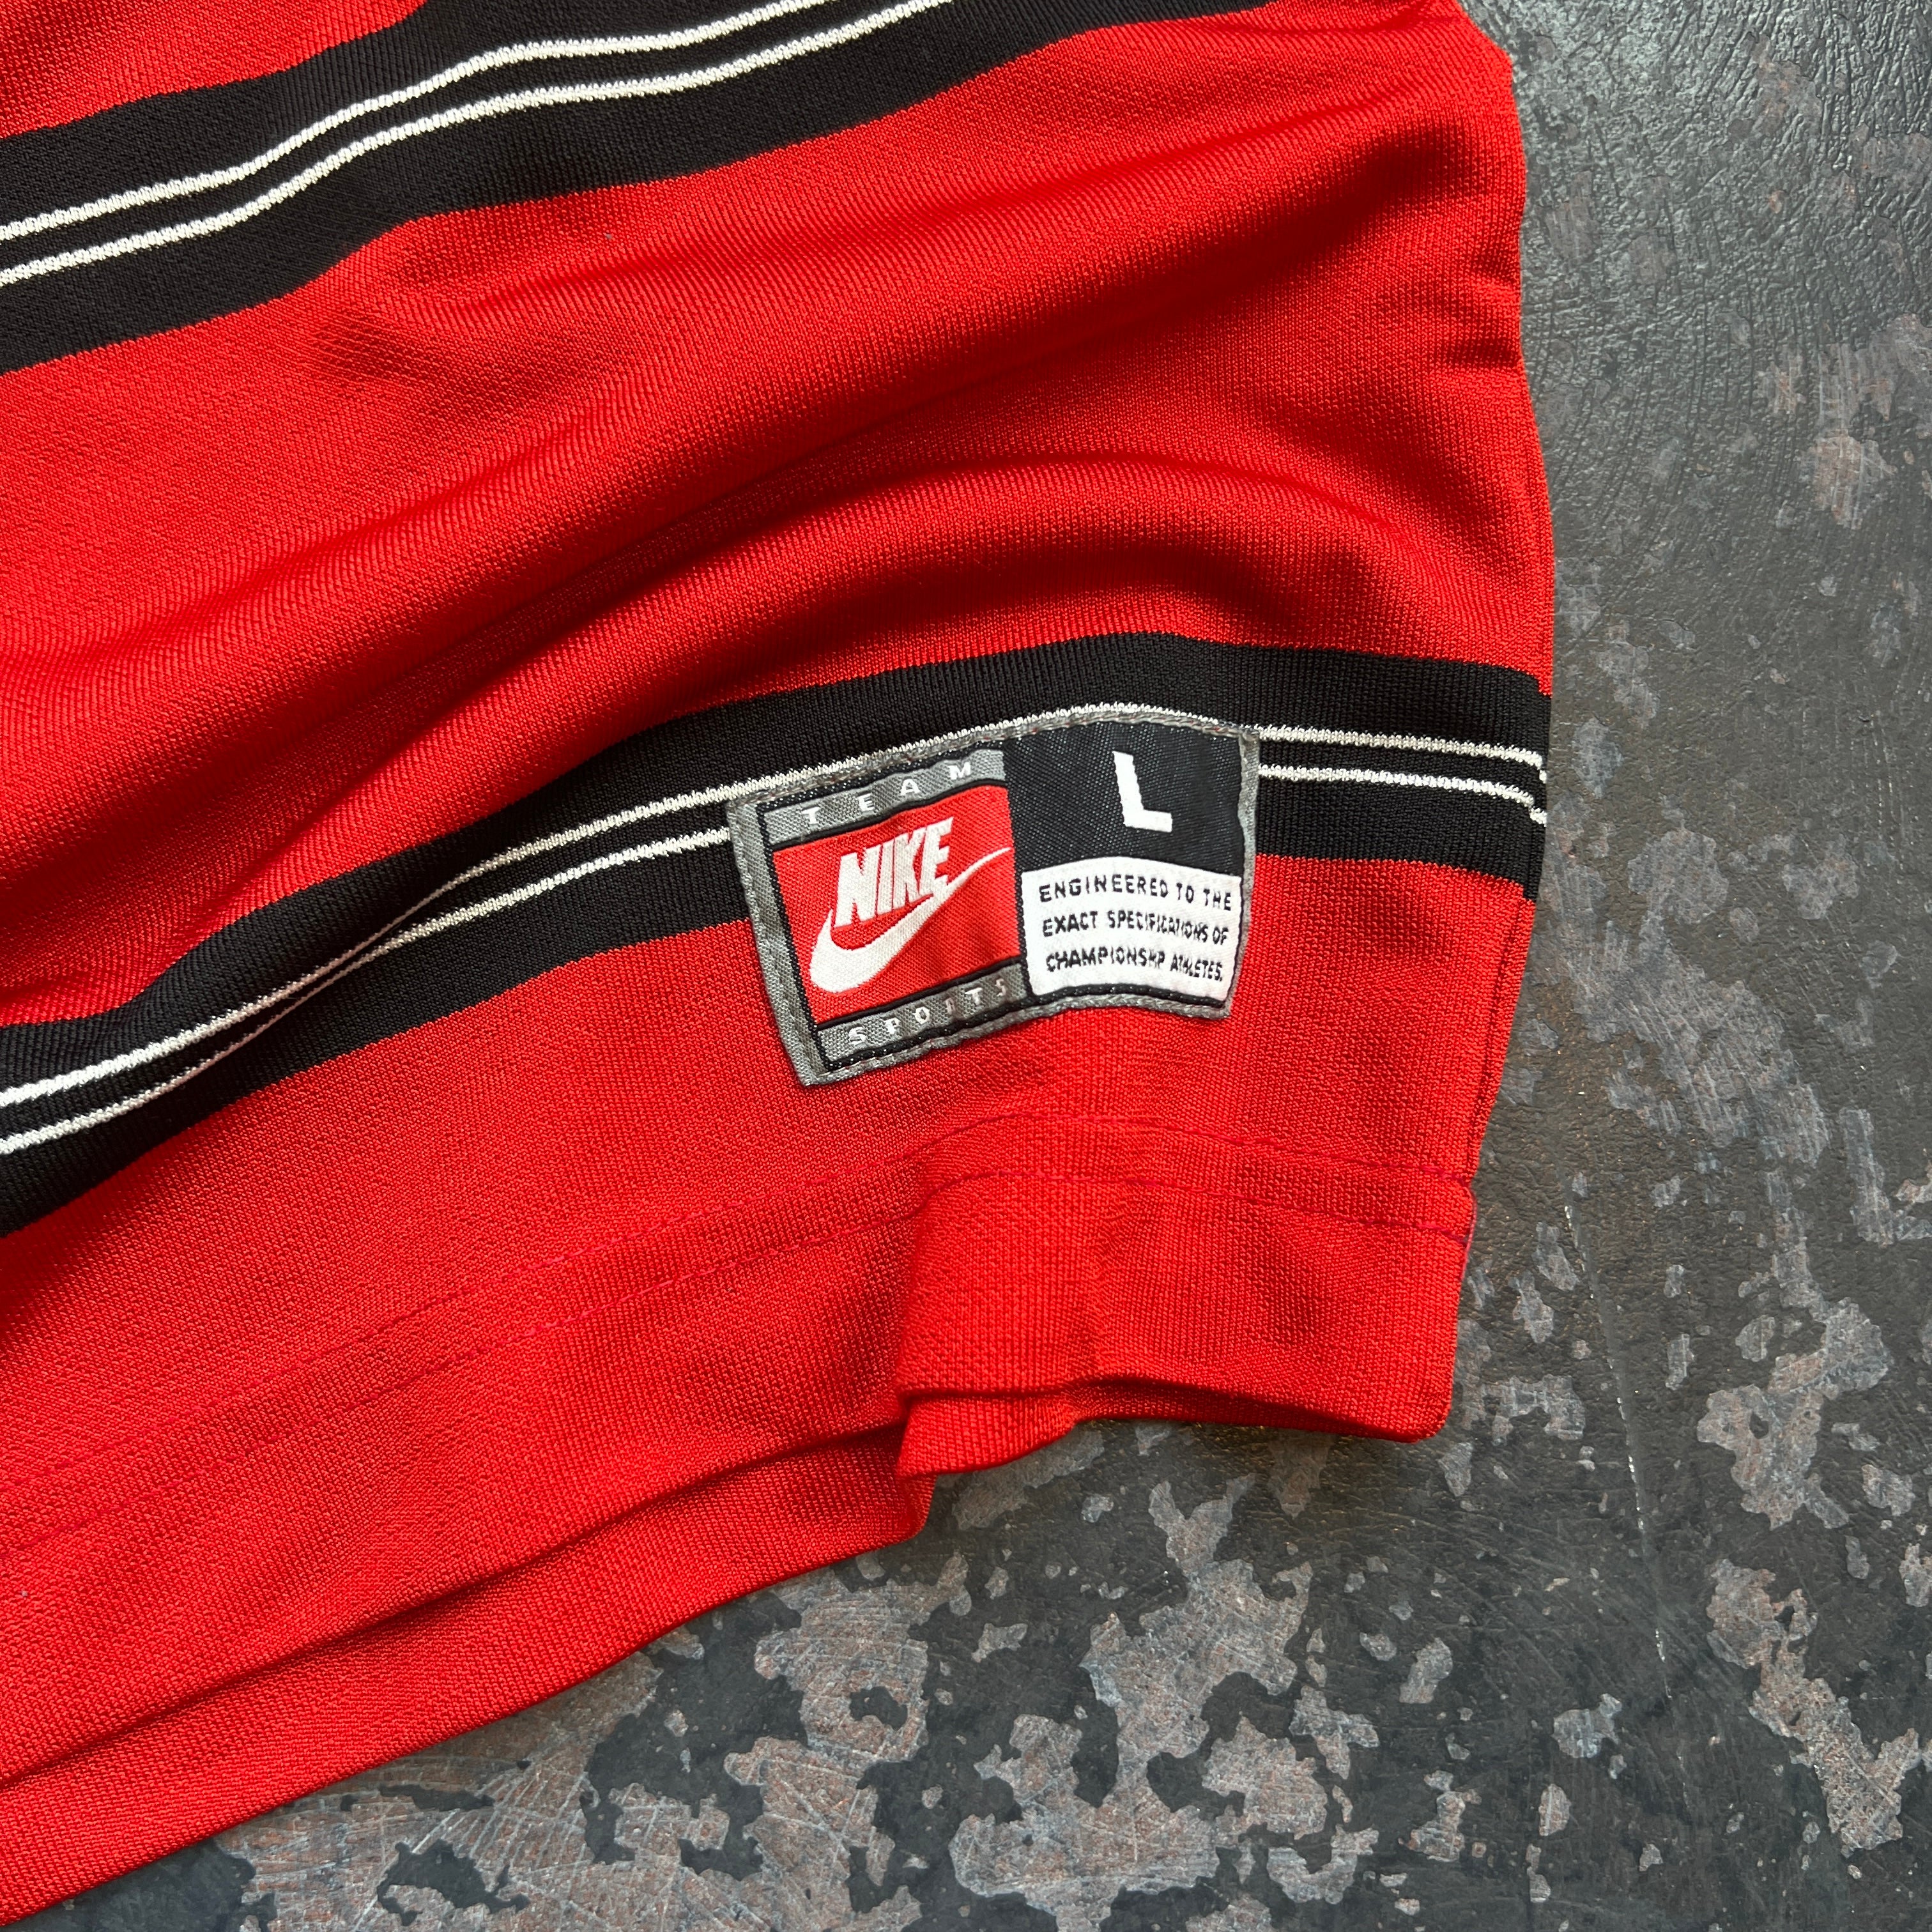 Rugby Stripes Nike Jersey